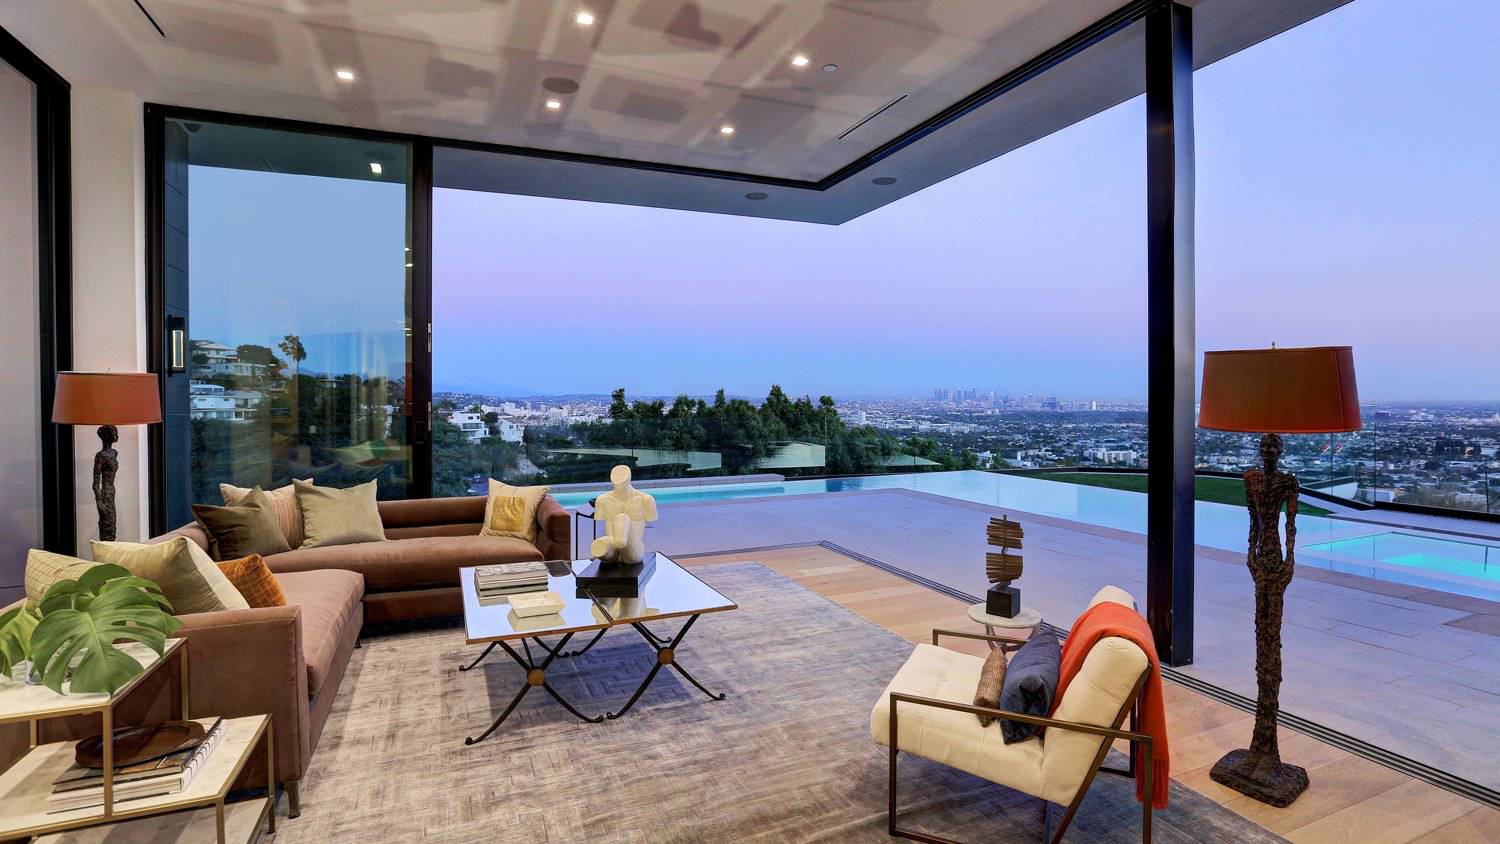 Sunset View Modern Home in Hollywood Hills by Studio Tim Campbell